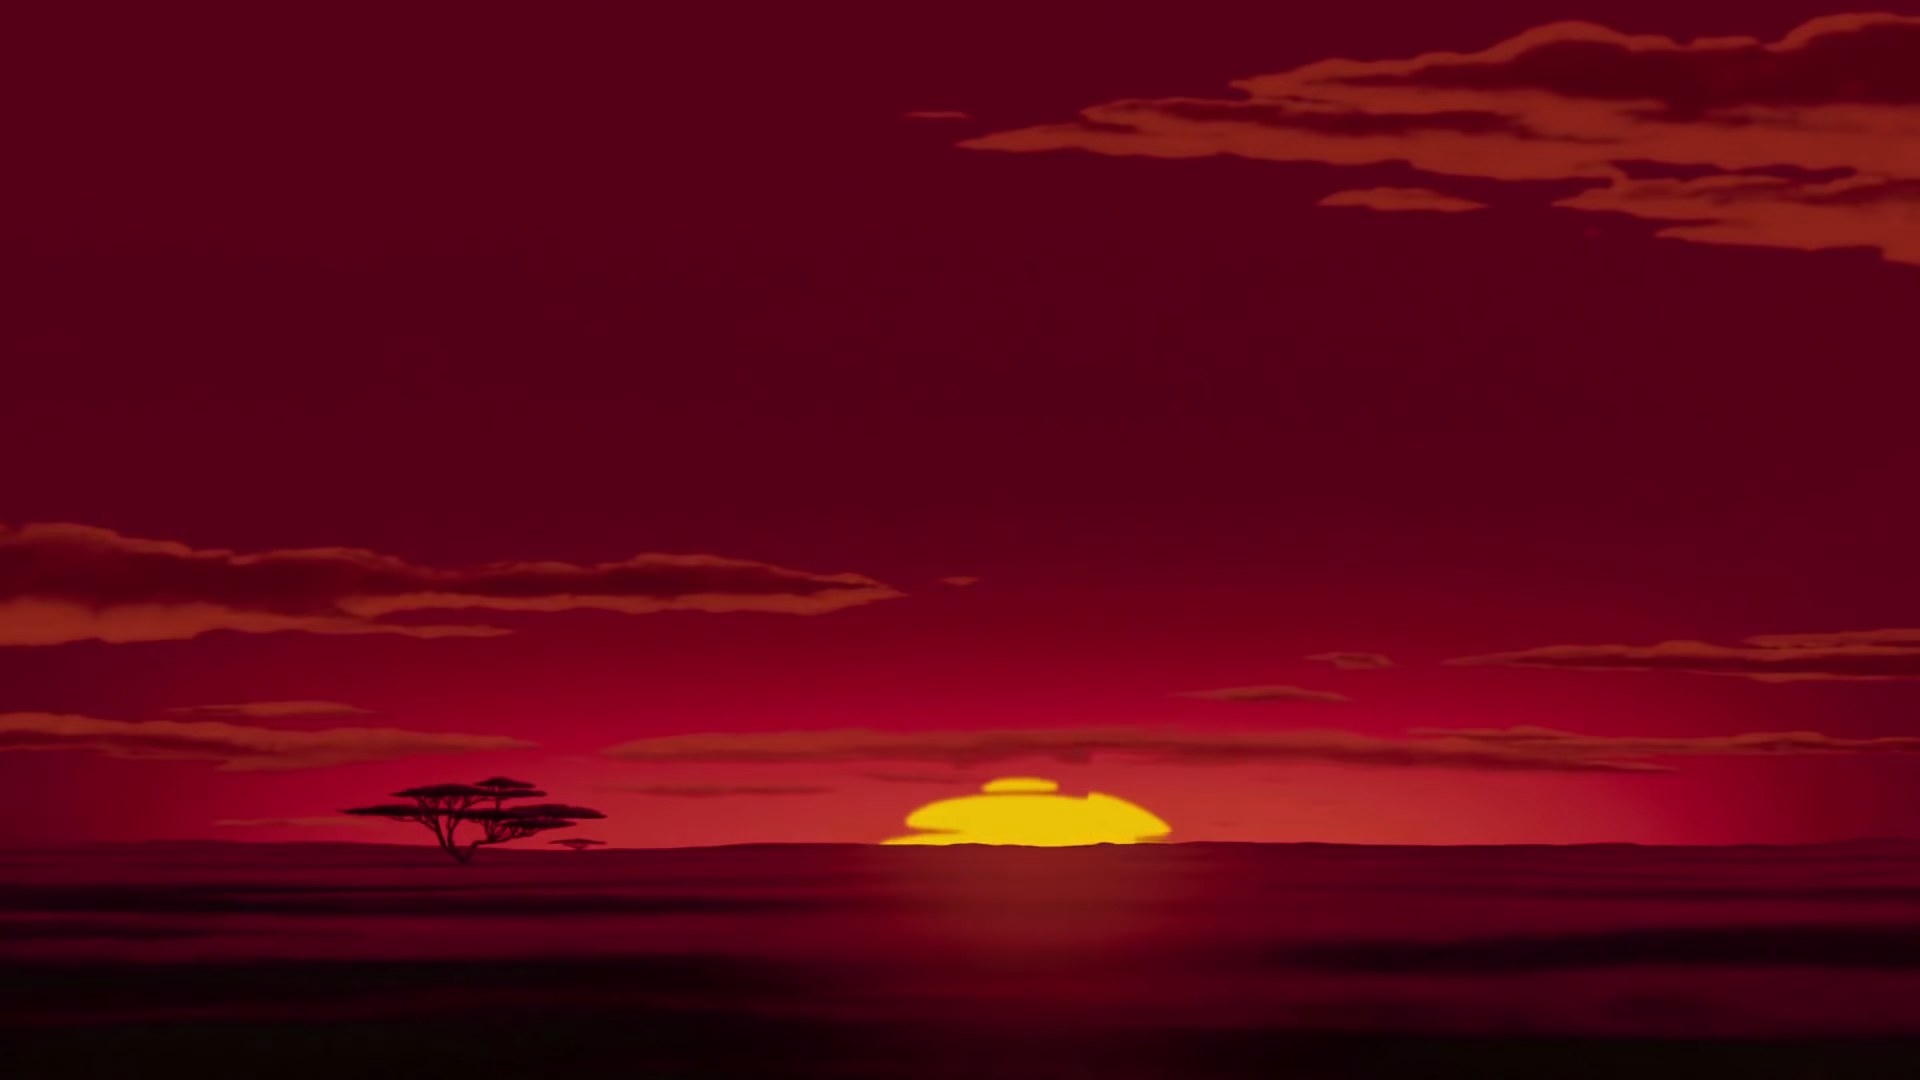 The opening scene of Chicken Little, which shows the sun rising over the horizon in the same way as in The Lion King